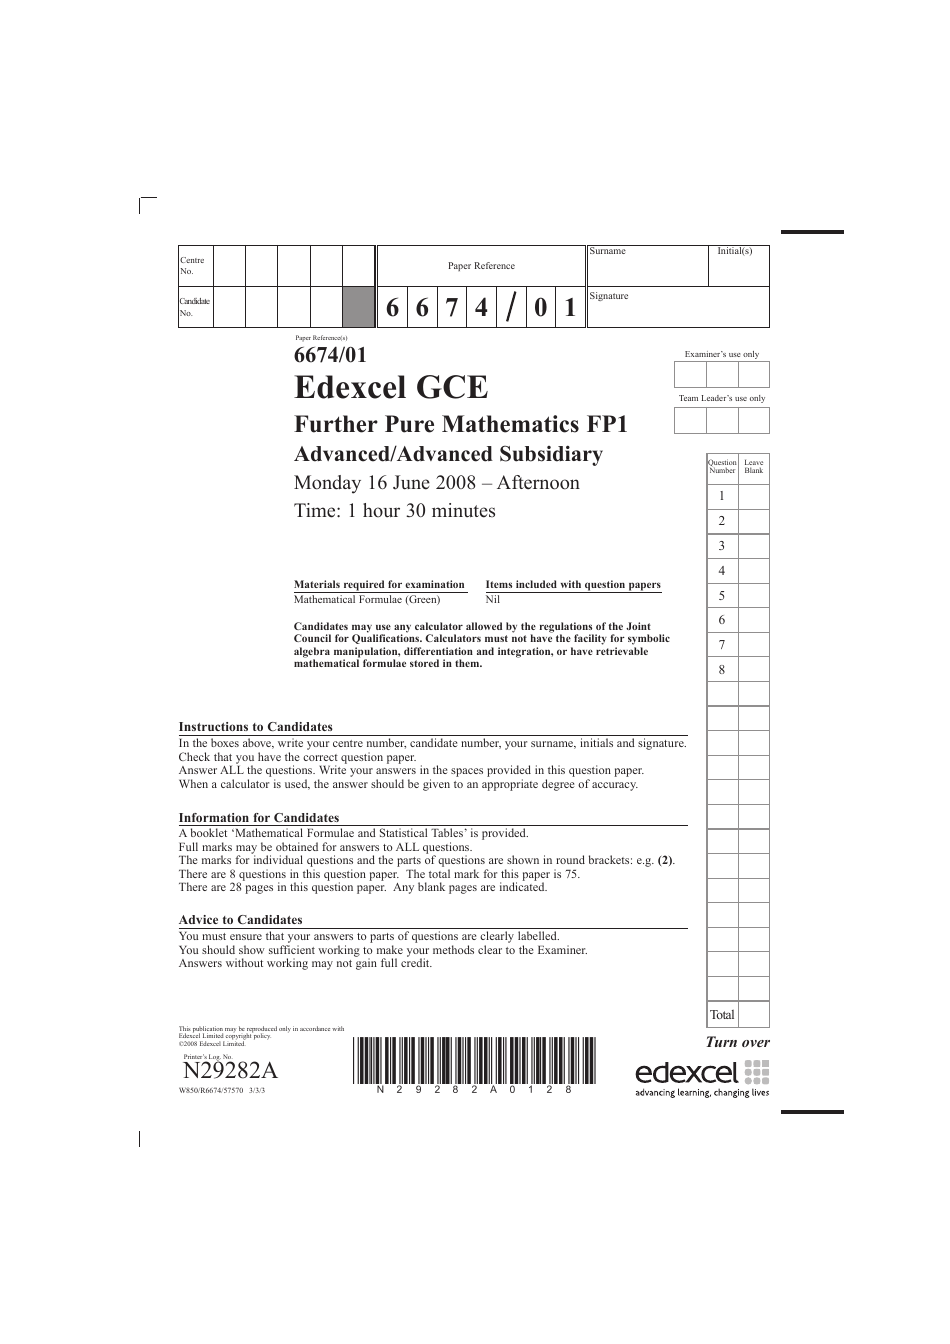 Preview of June 2008 Edexcel GCE Further Pure Mathematics FP1 document